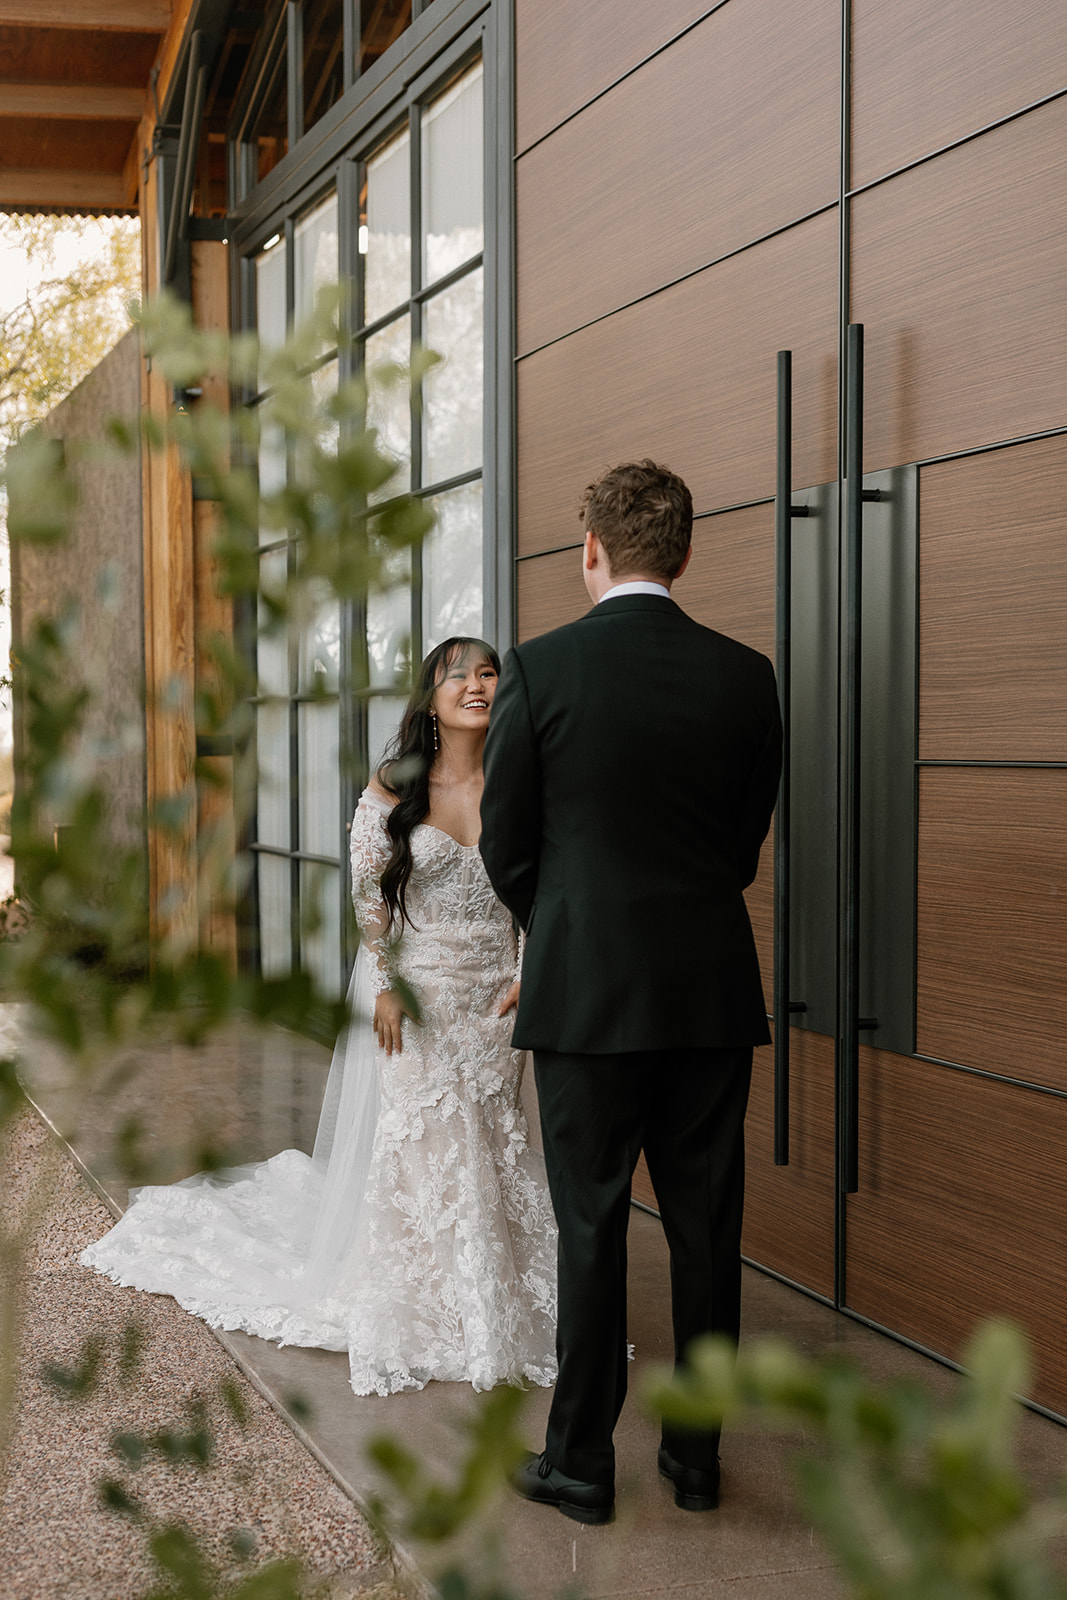 stunning bride and groom share an intimate first look wedding photoshoot